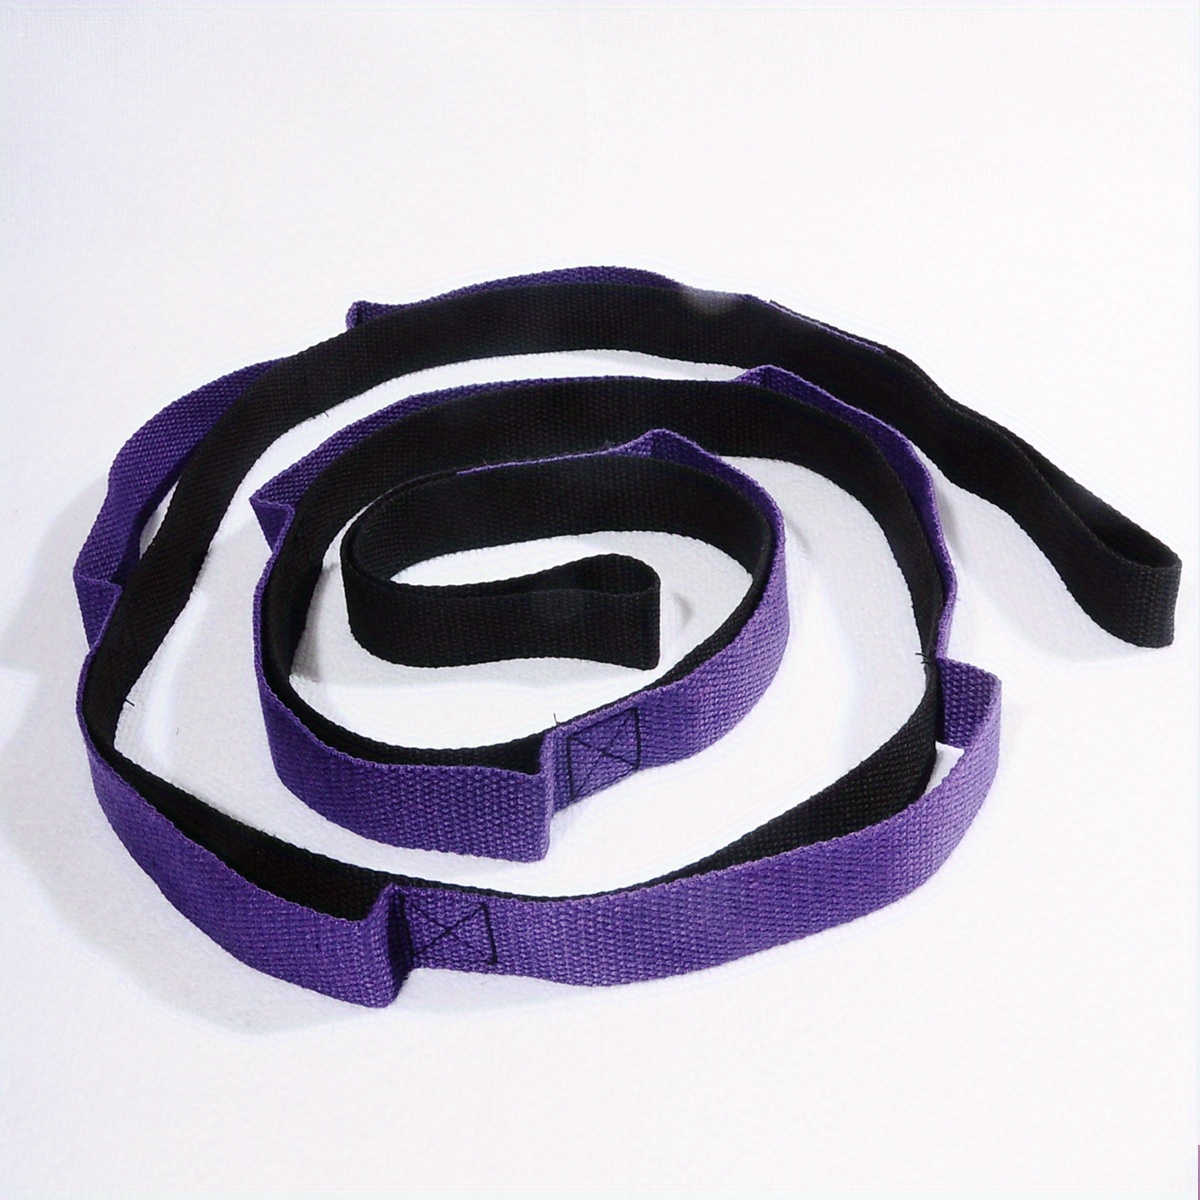 SJJEBSK Stretching Strap Yoga for Physical Black, purple, pink